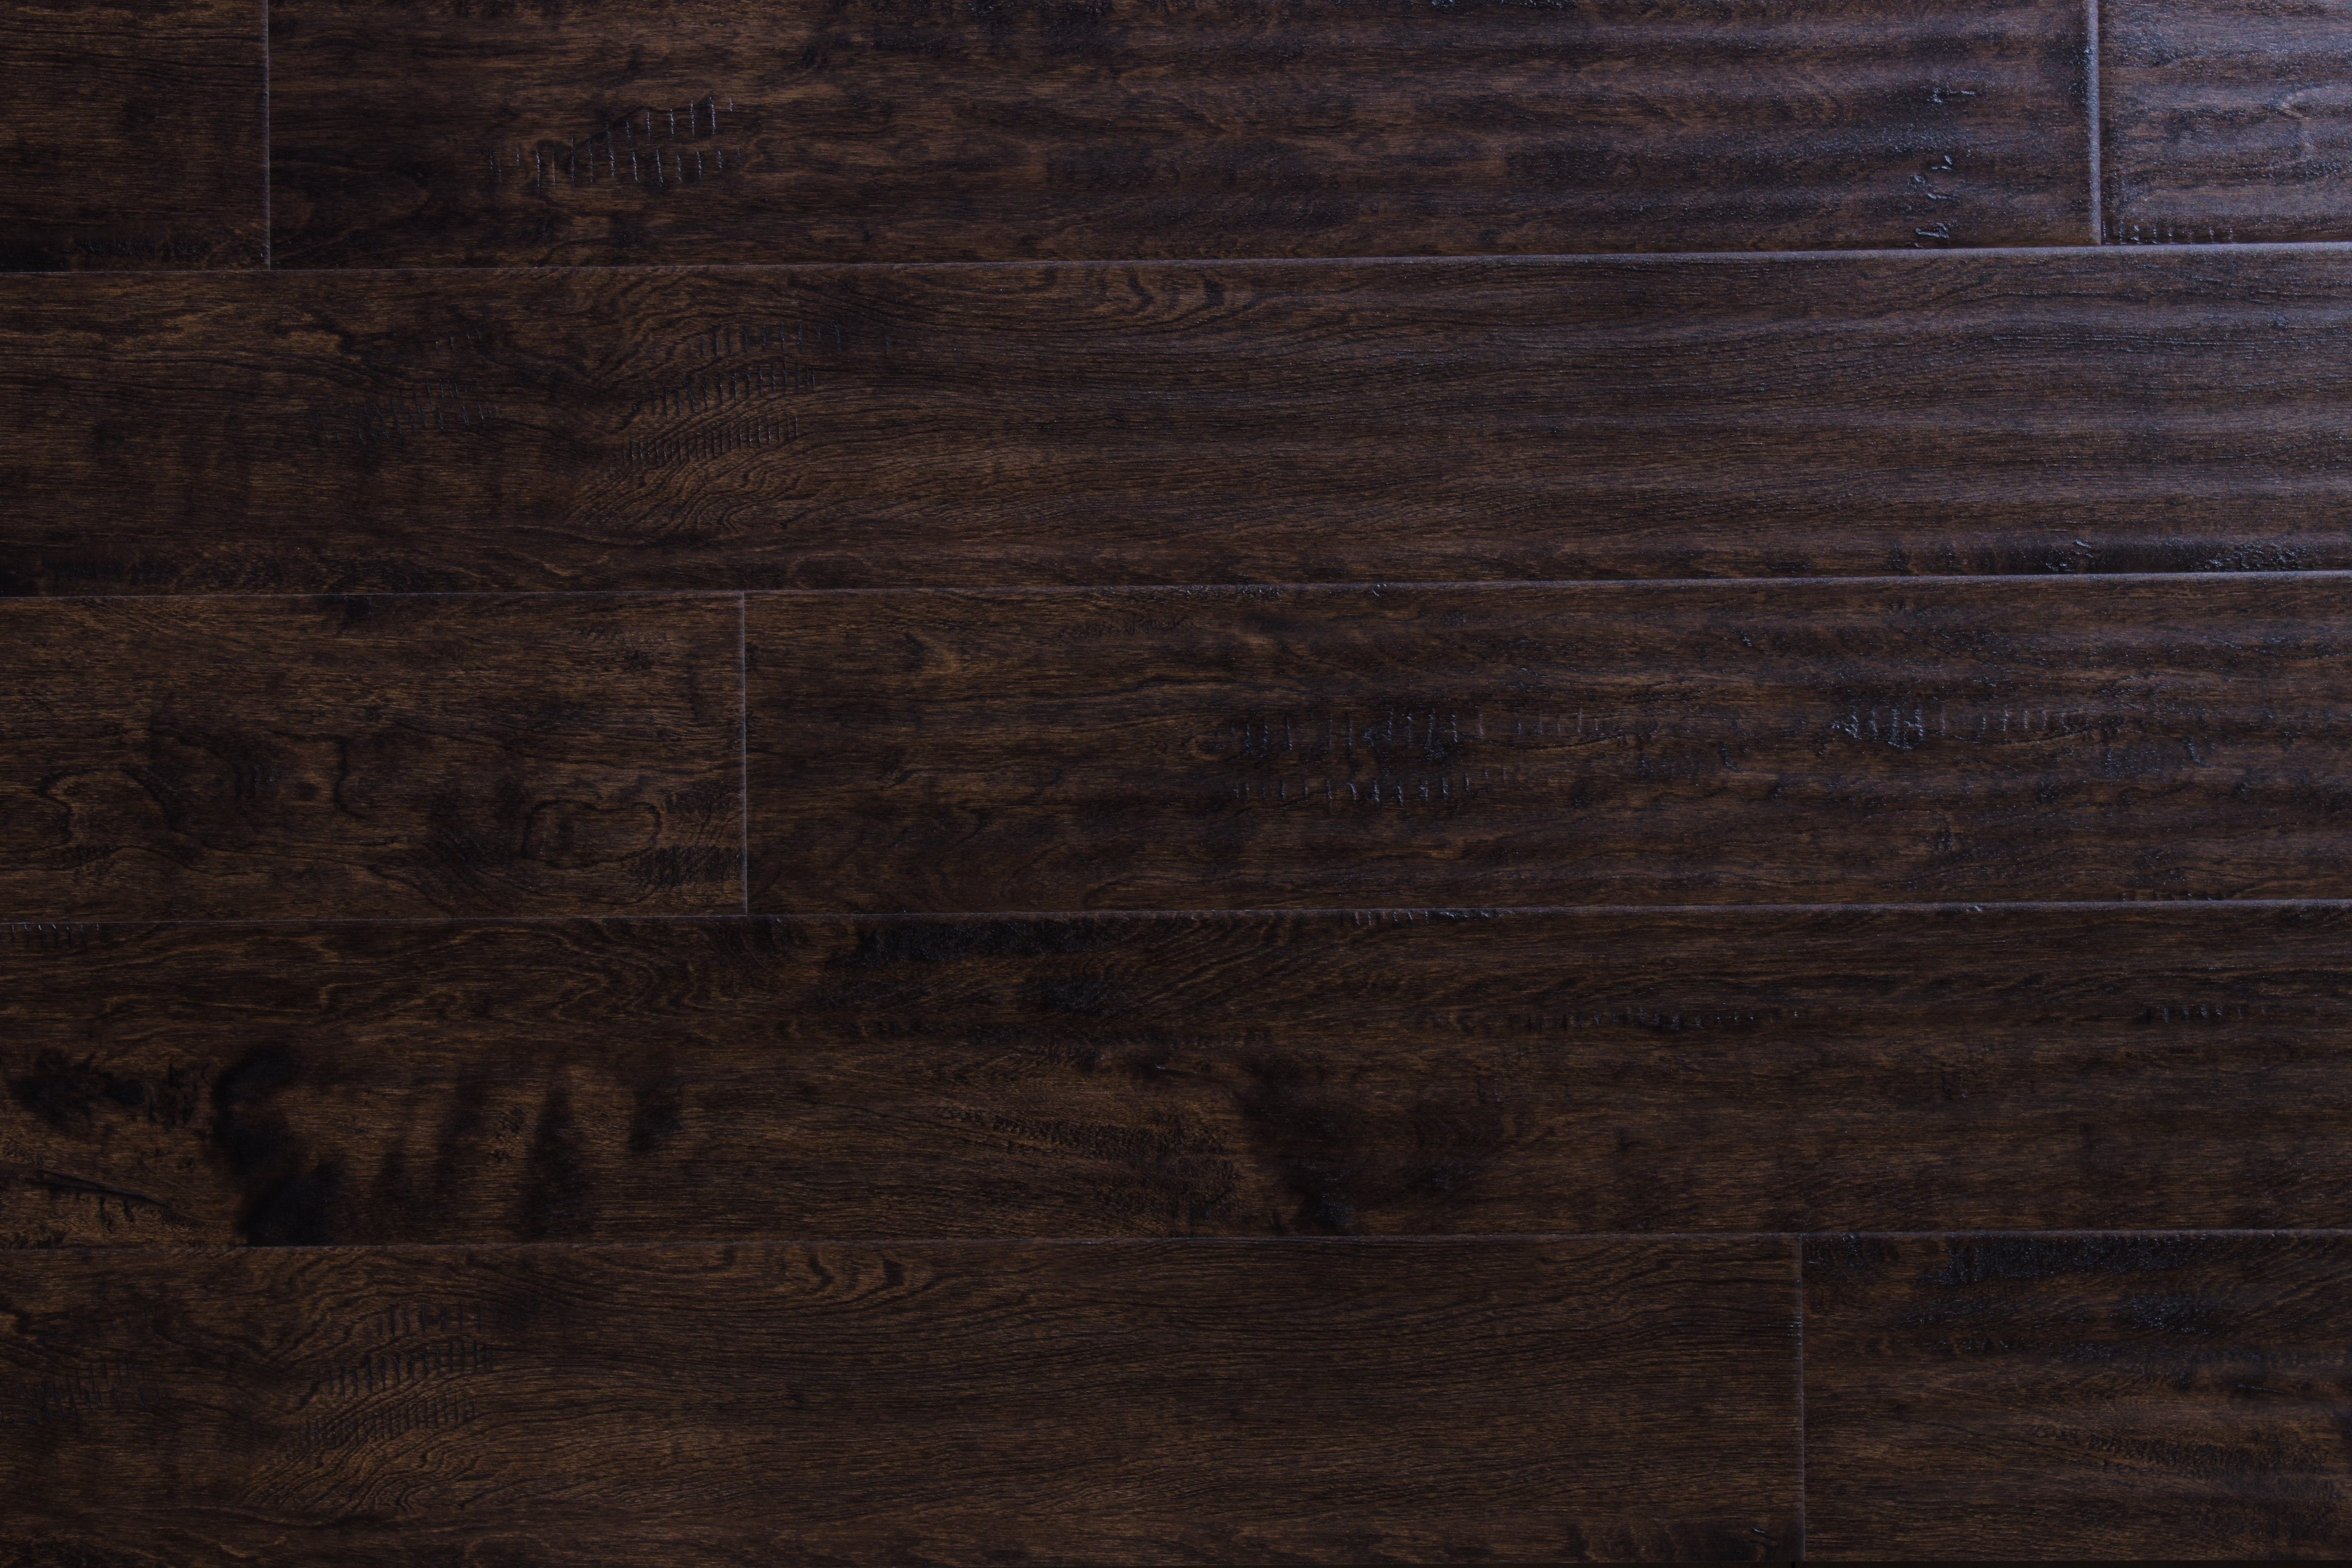 19 Fashionable Gew Hardwood Flooring 2024 free download gew hardwood flooring of wood flooring free samples available at builddirecta with tailor multi gb 5874277bb8d3c